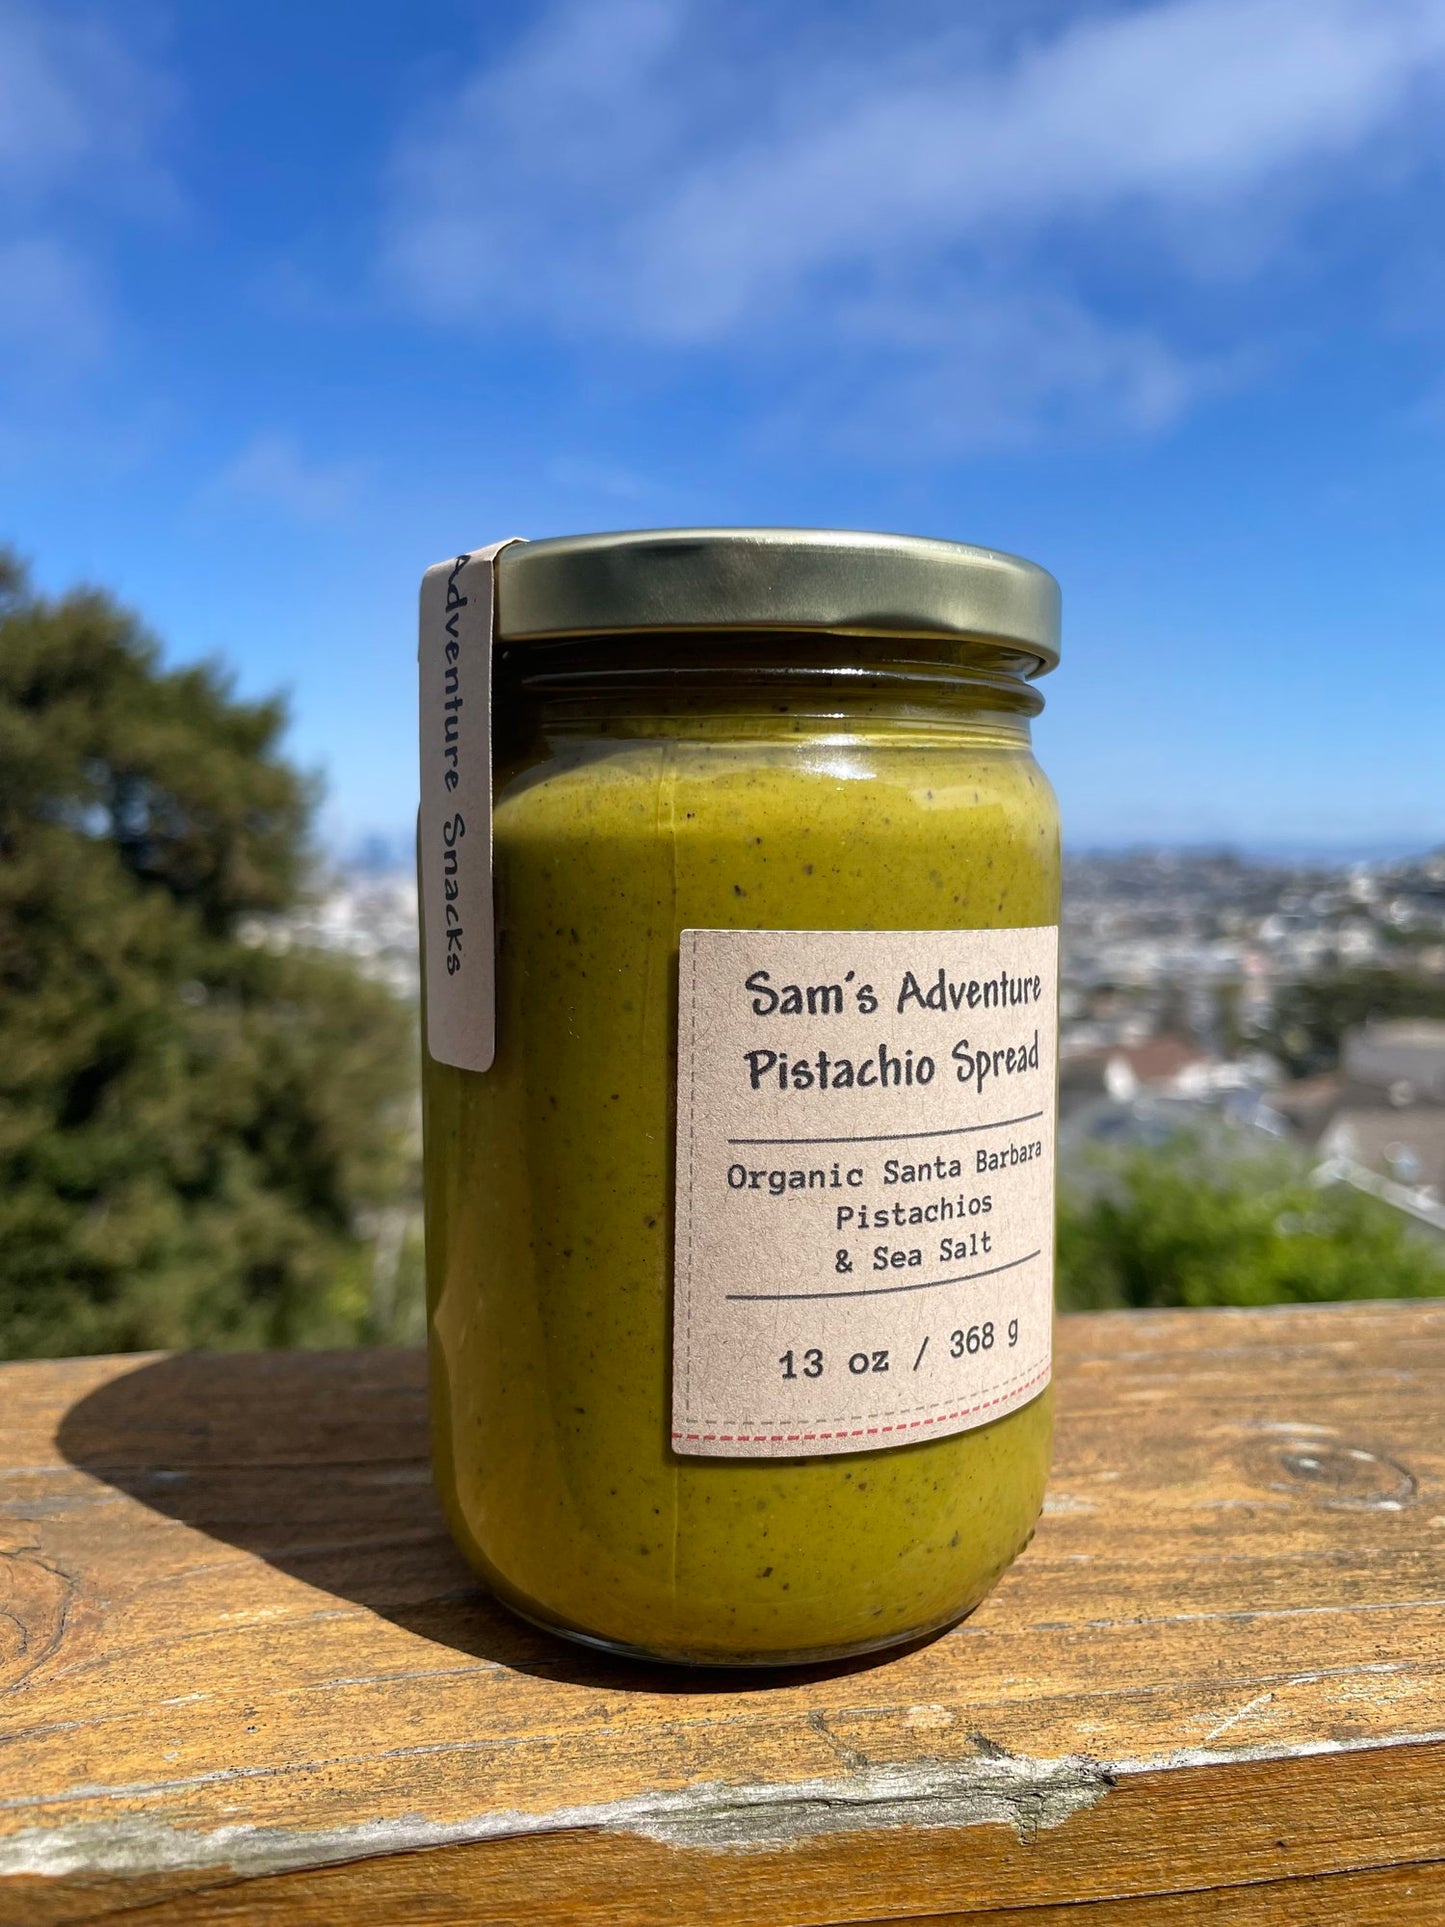 13 oz jar of organic santa barbara pistachio spread. Jar is placed on a wood bench with the city of San Francisco in the background. Label on jar lists "Sam's Adventure Pistachio Spread", "Organic Santa Barbara Pistachios & Sea Salt" and 13 oz/368g